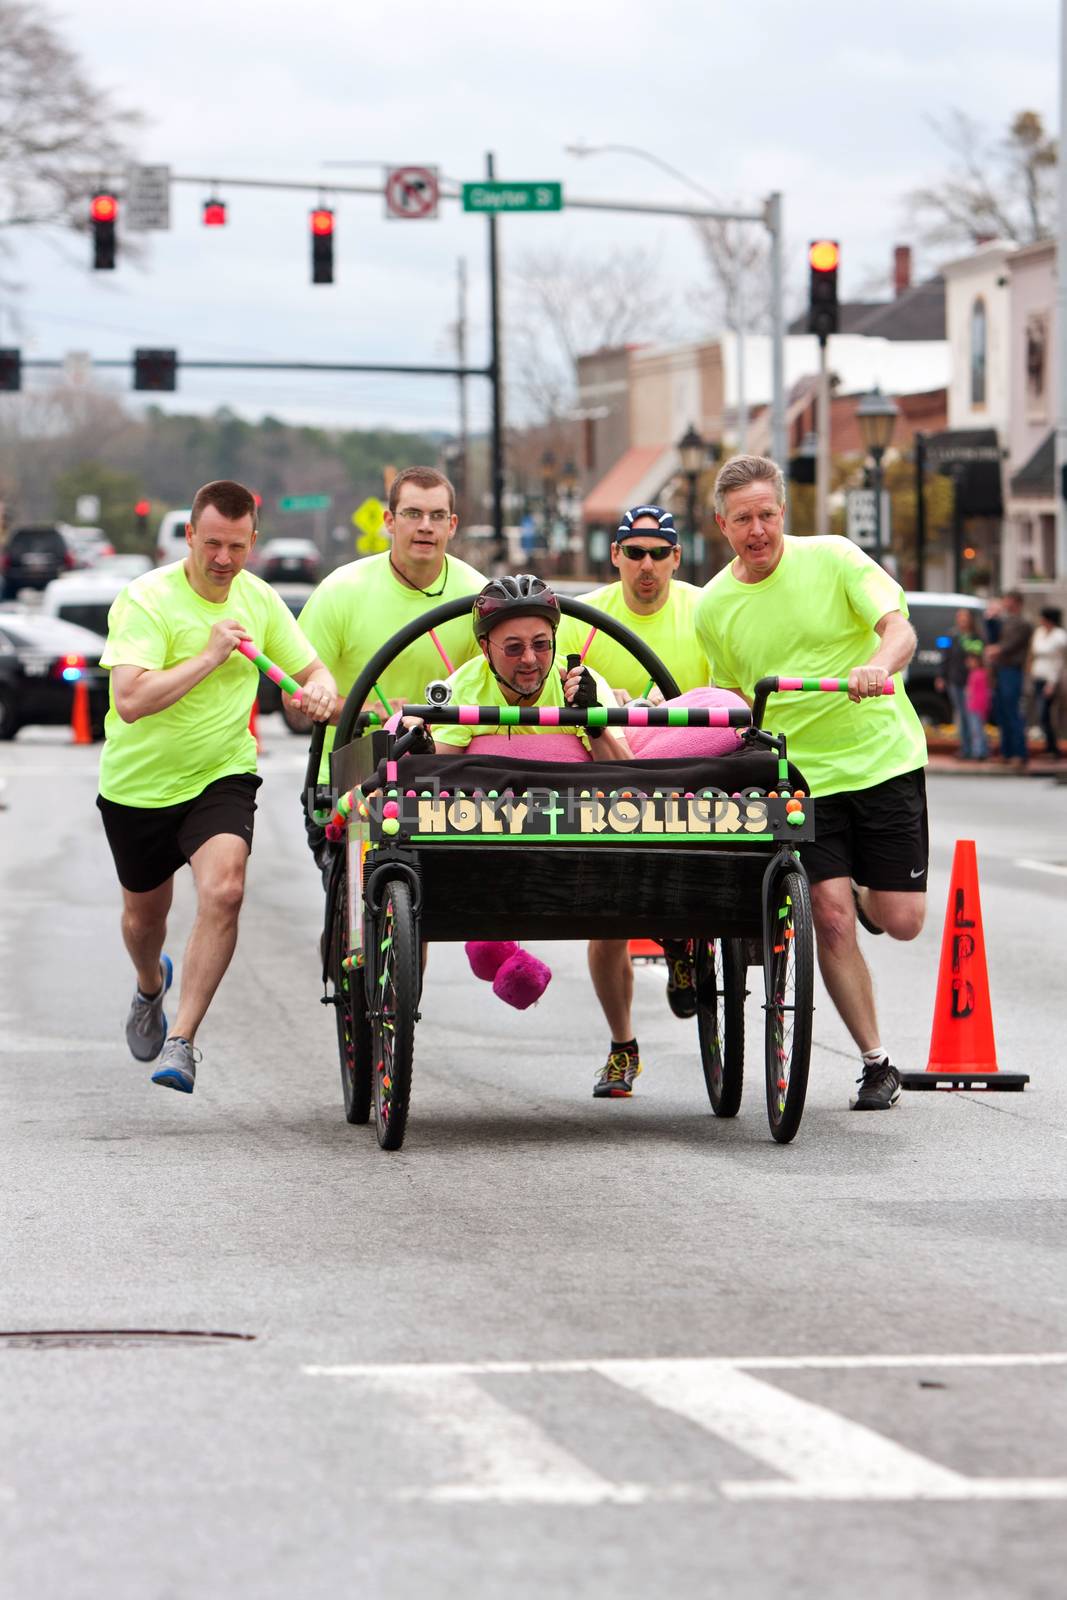 Clergymen Push Holy Rollers Bed In Annual Fundraiser Race by BluIz60